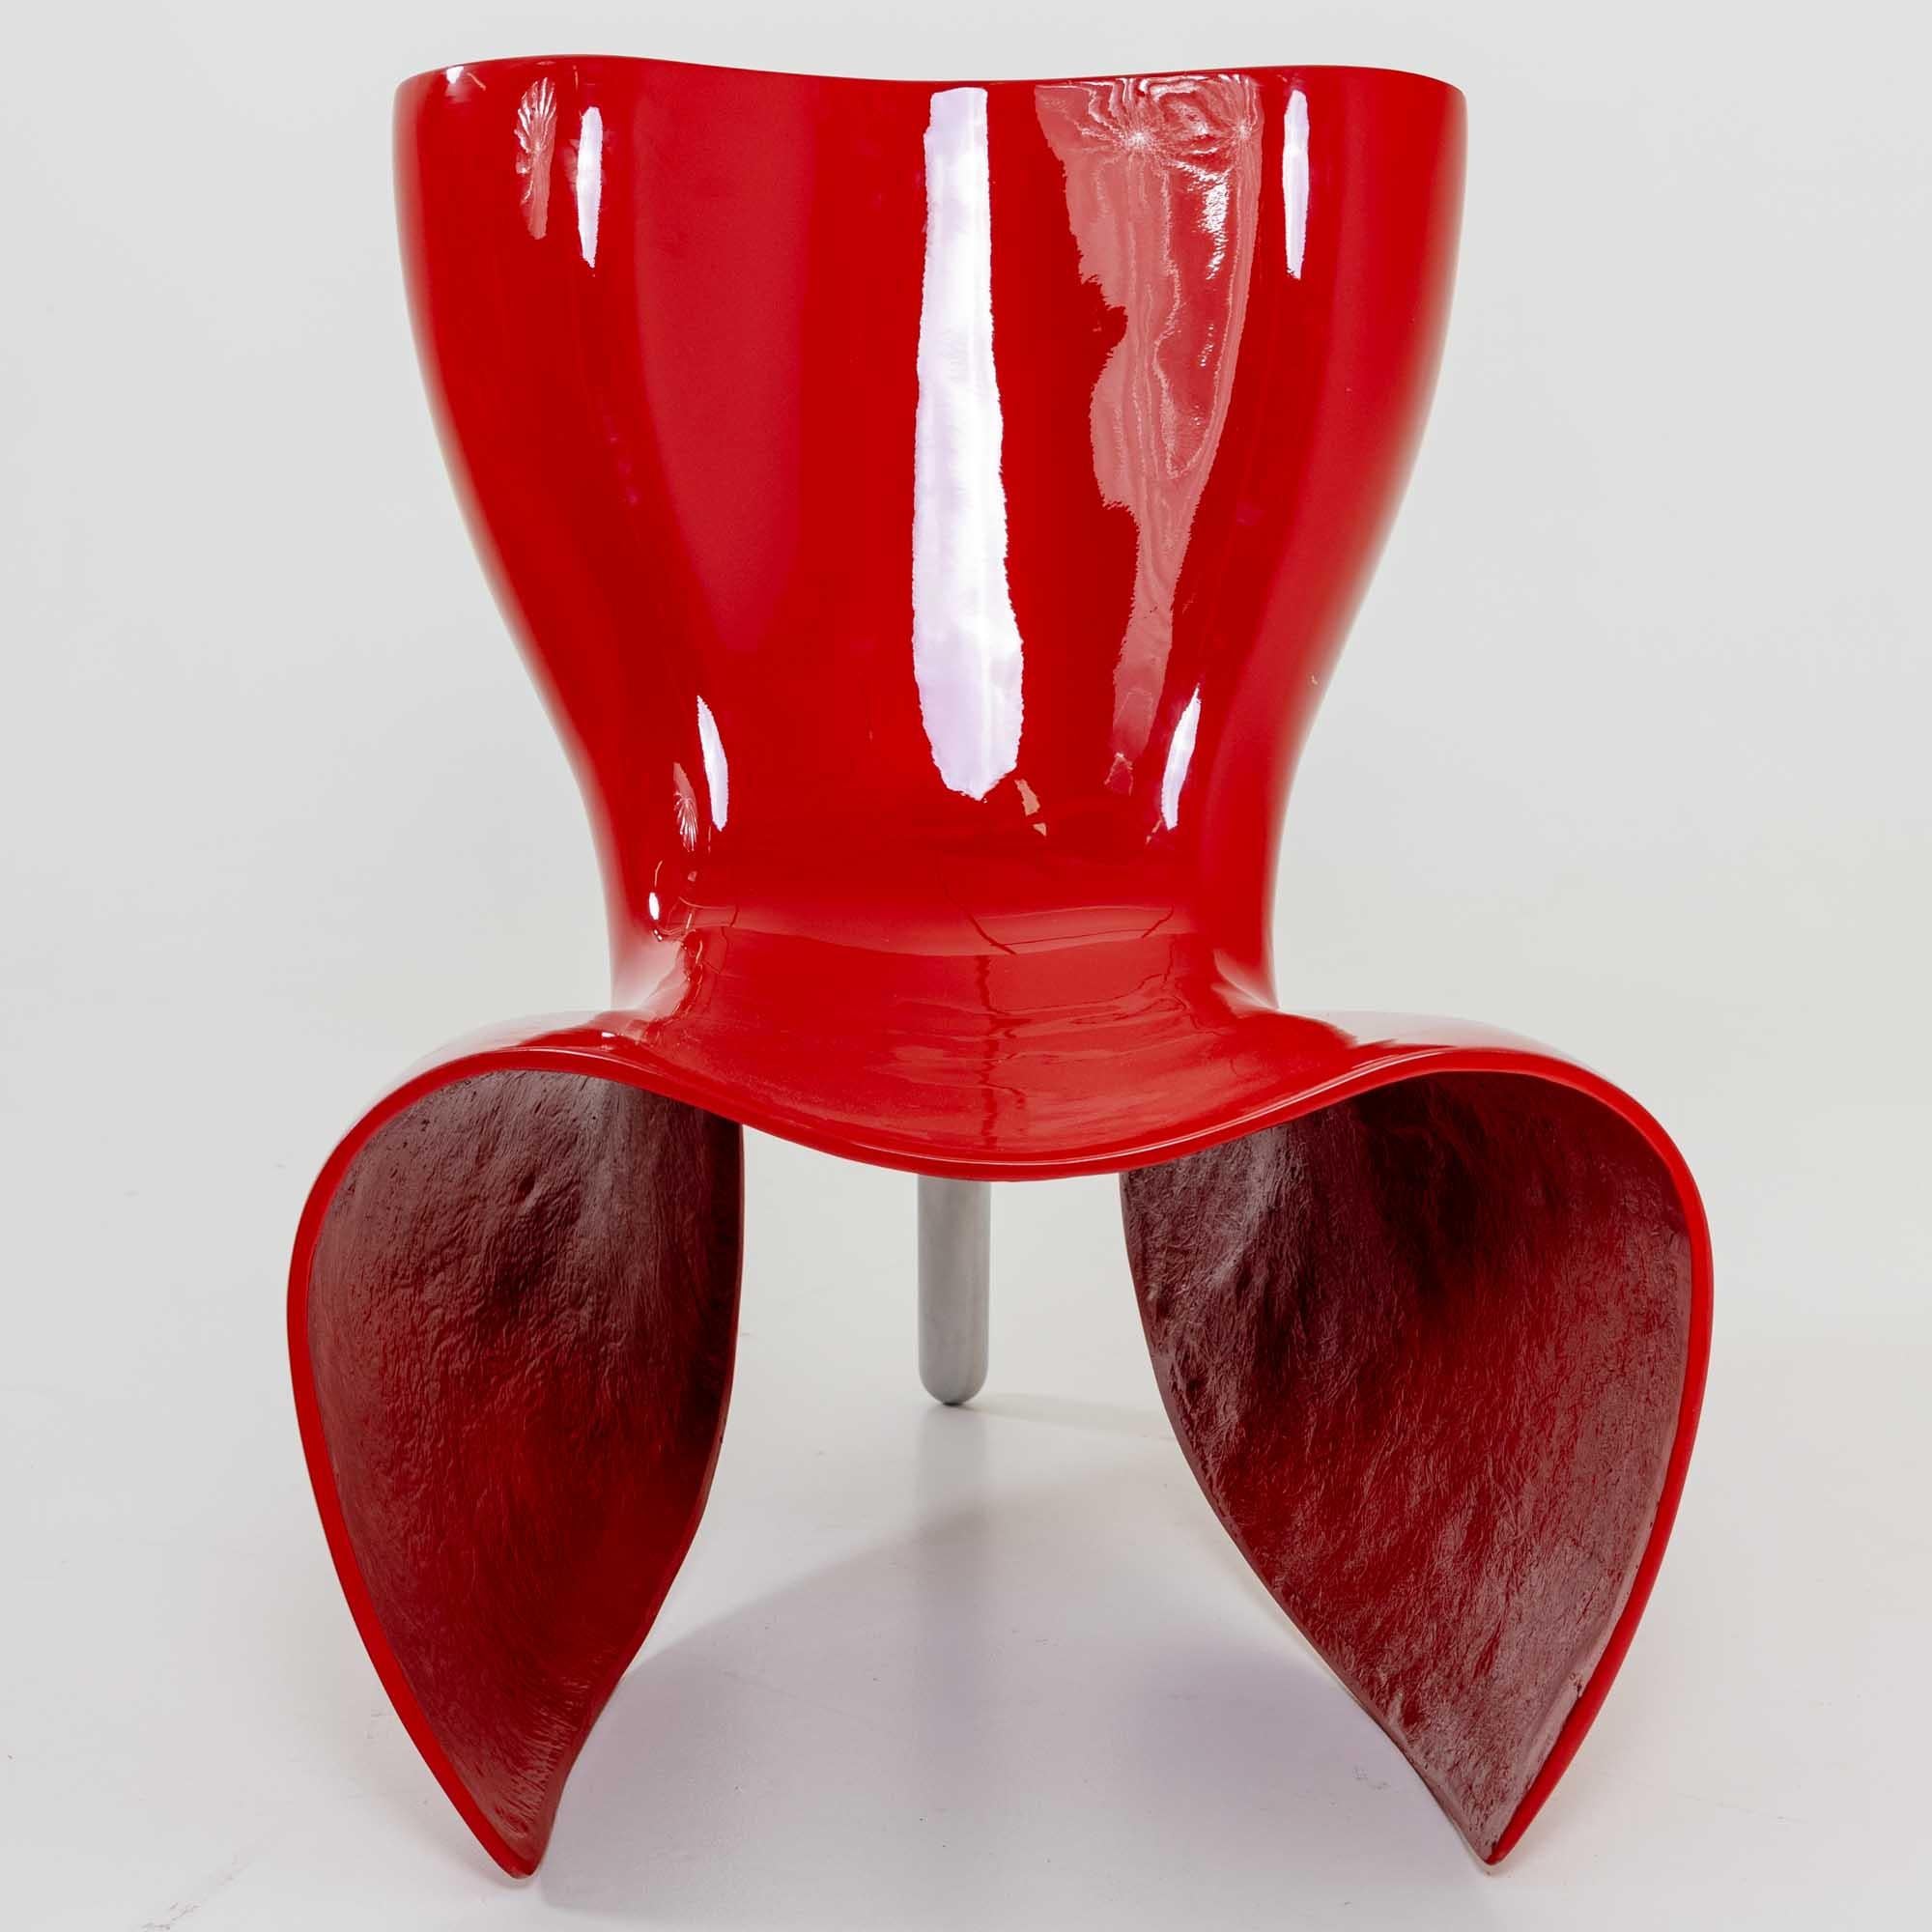 Late 20th Century Felt Chair by Marc Newson for Cappellini, Italy designed in 1993 For Sale